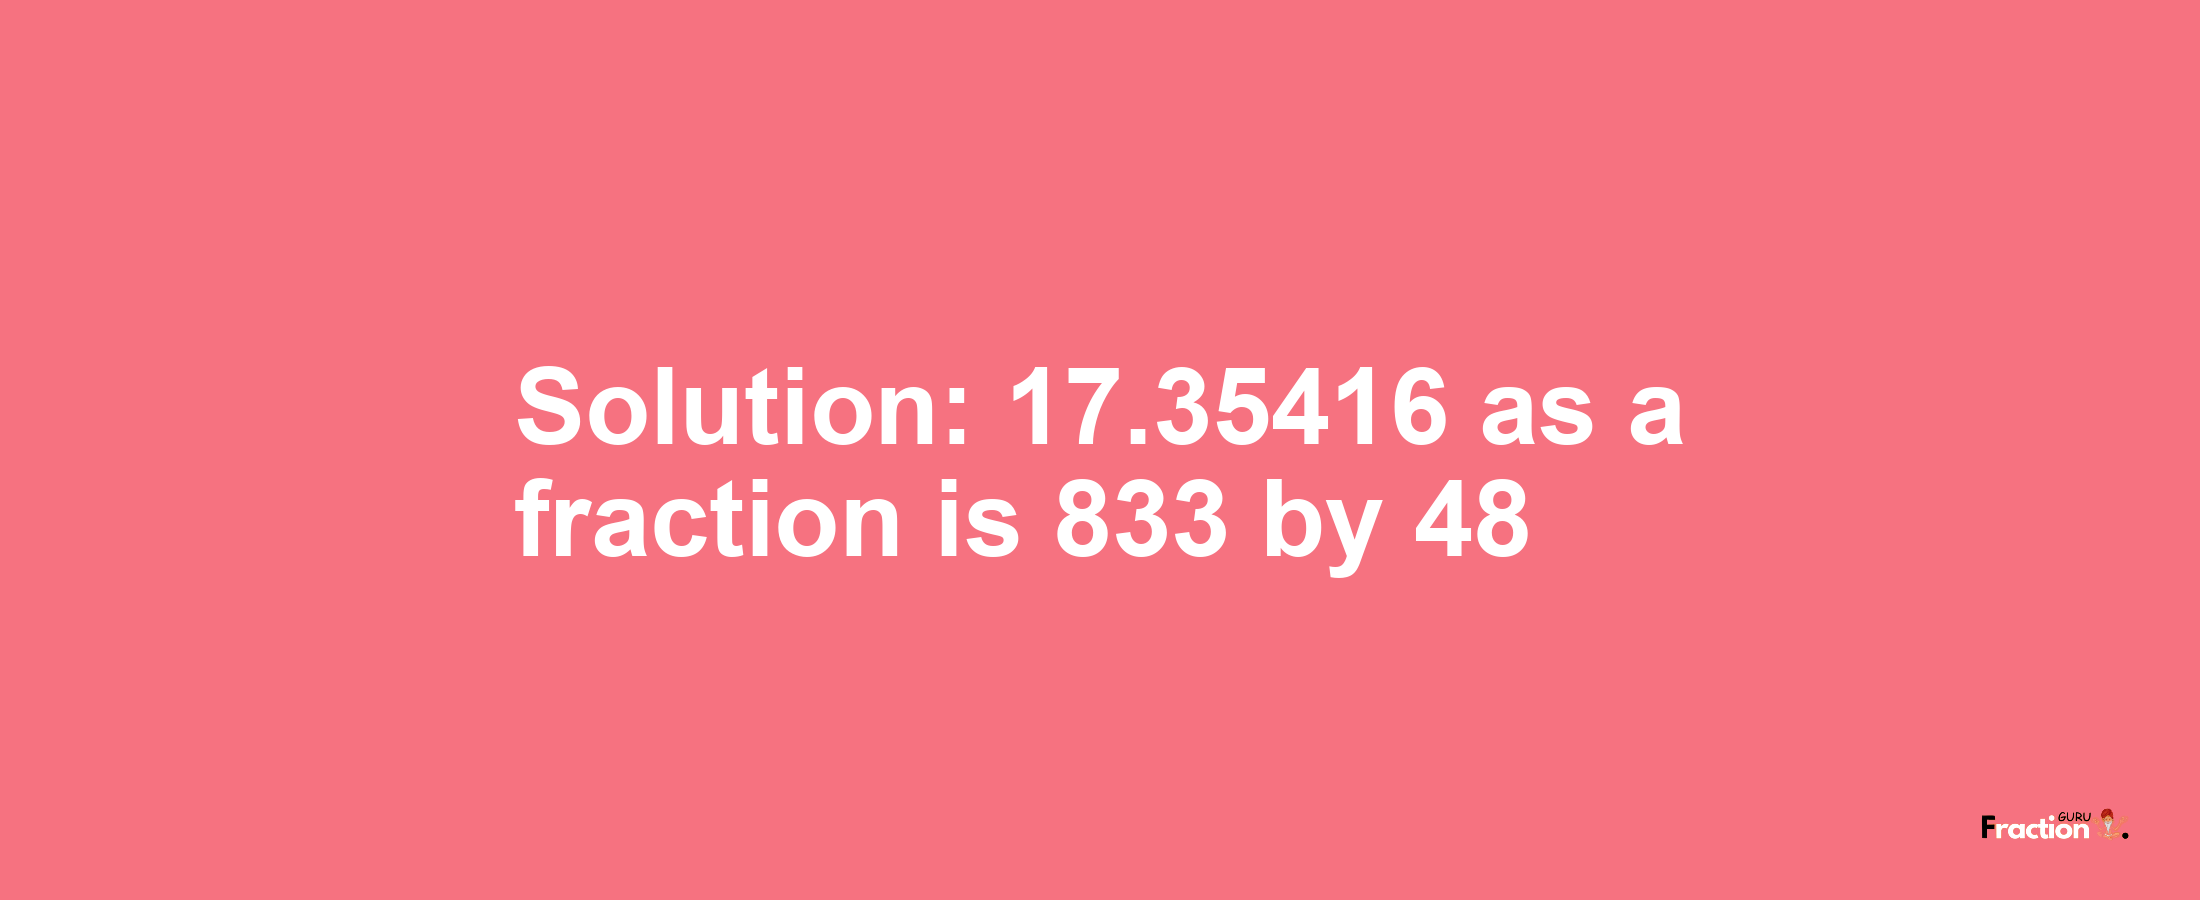 Solution:17.35416 as a fraction is 833/48